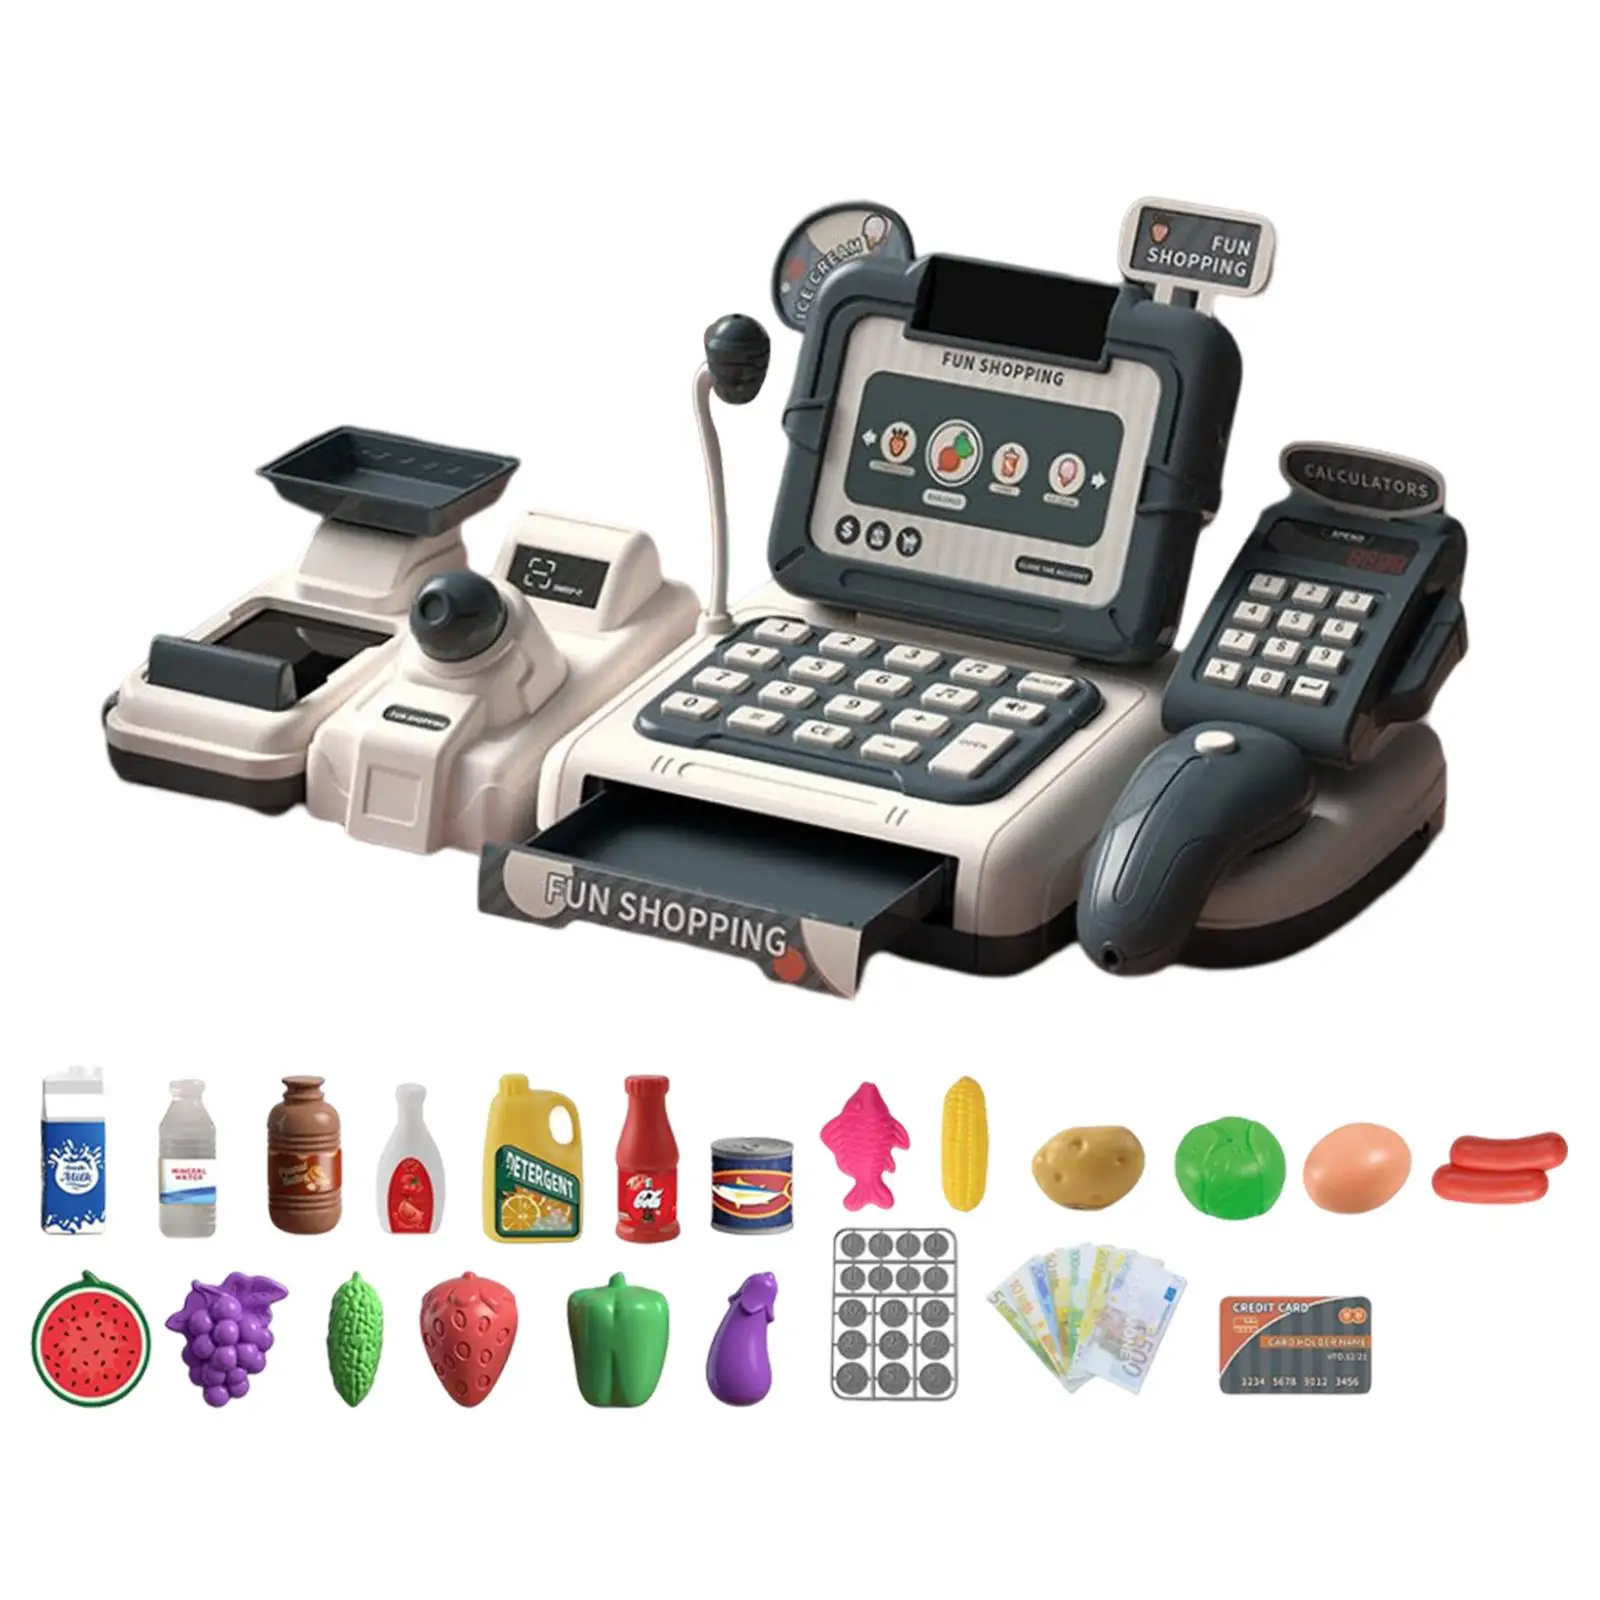 Cash Register Playset with Lights and Sounds Store Playset Kids Supermarket Cash Register Playset Cash Register for Baby Gifts